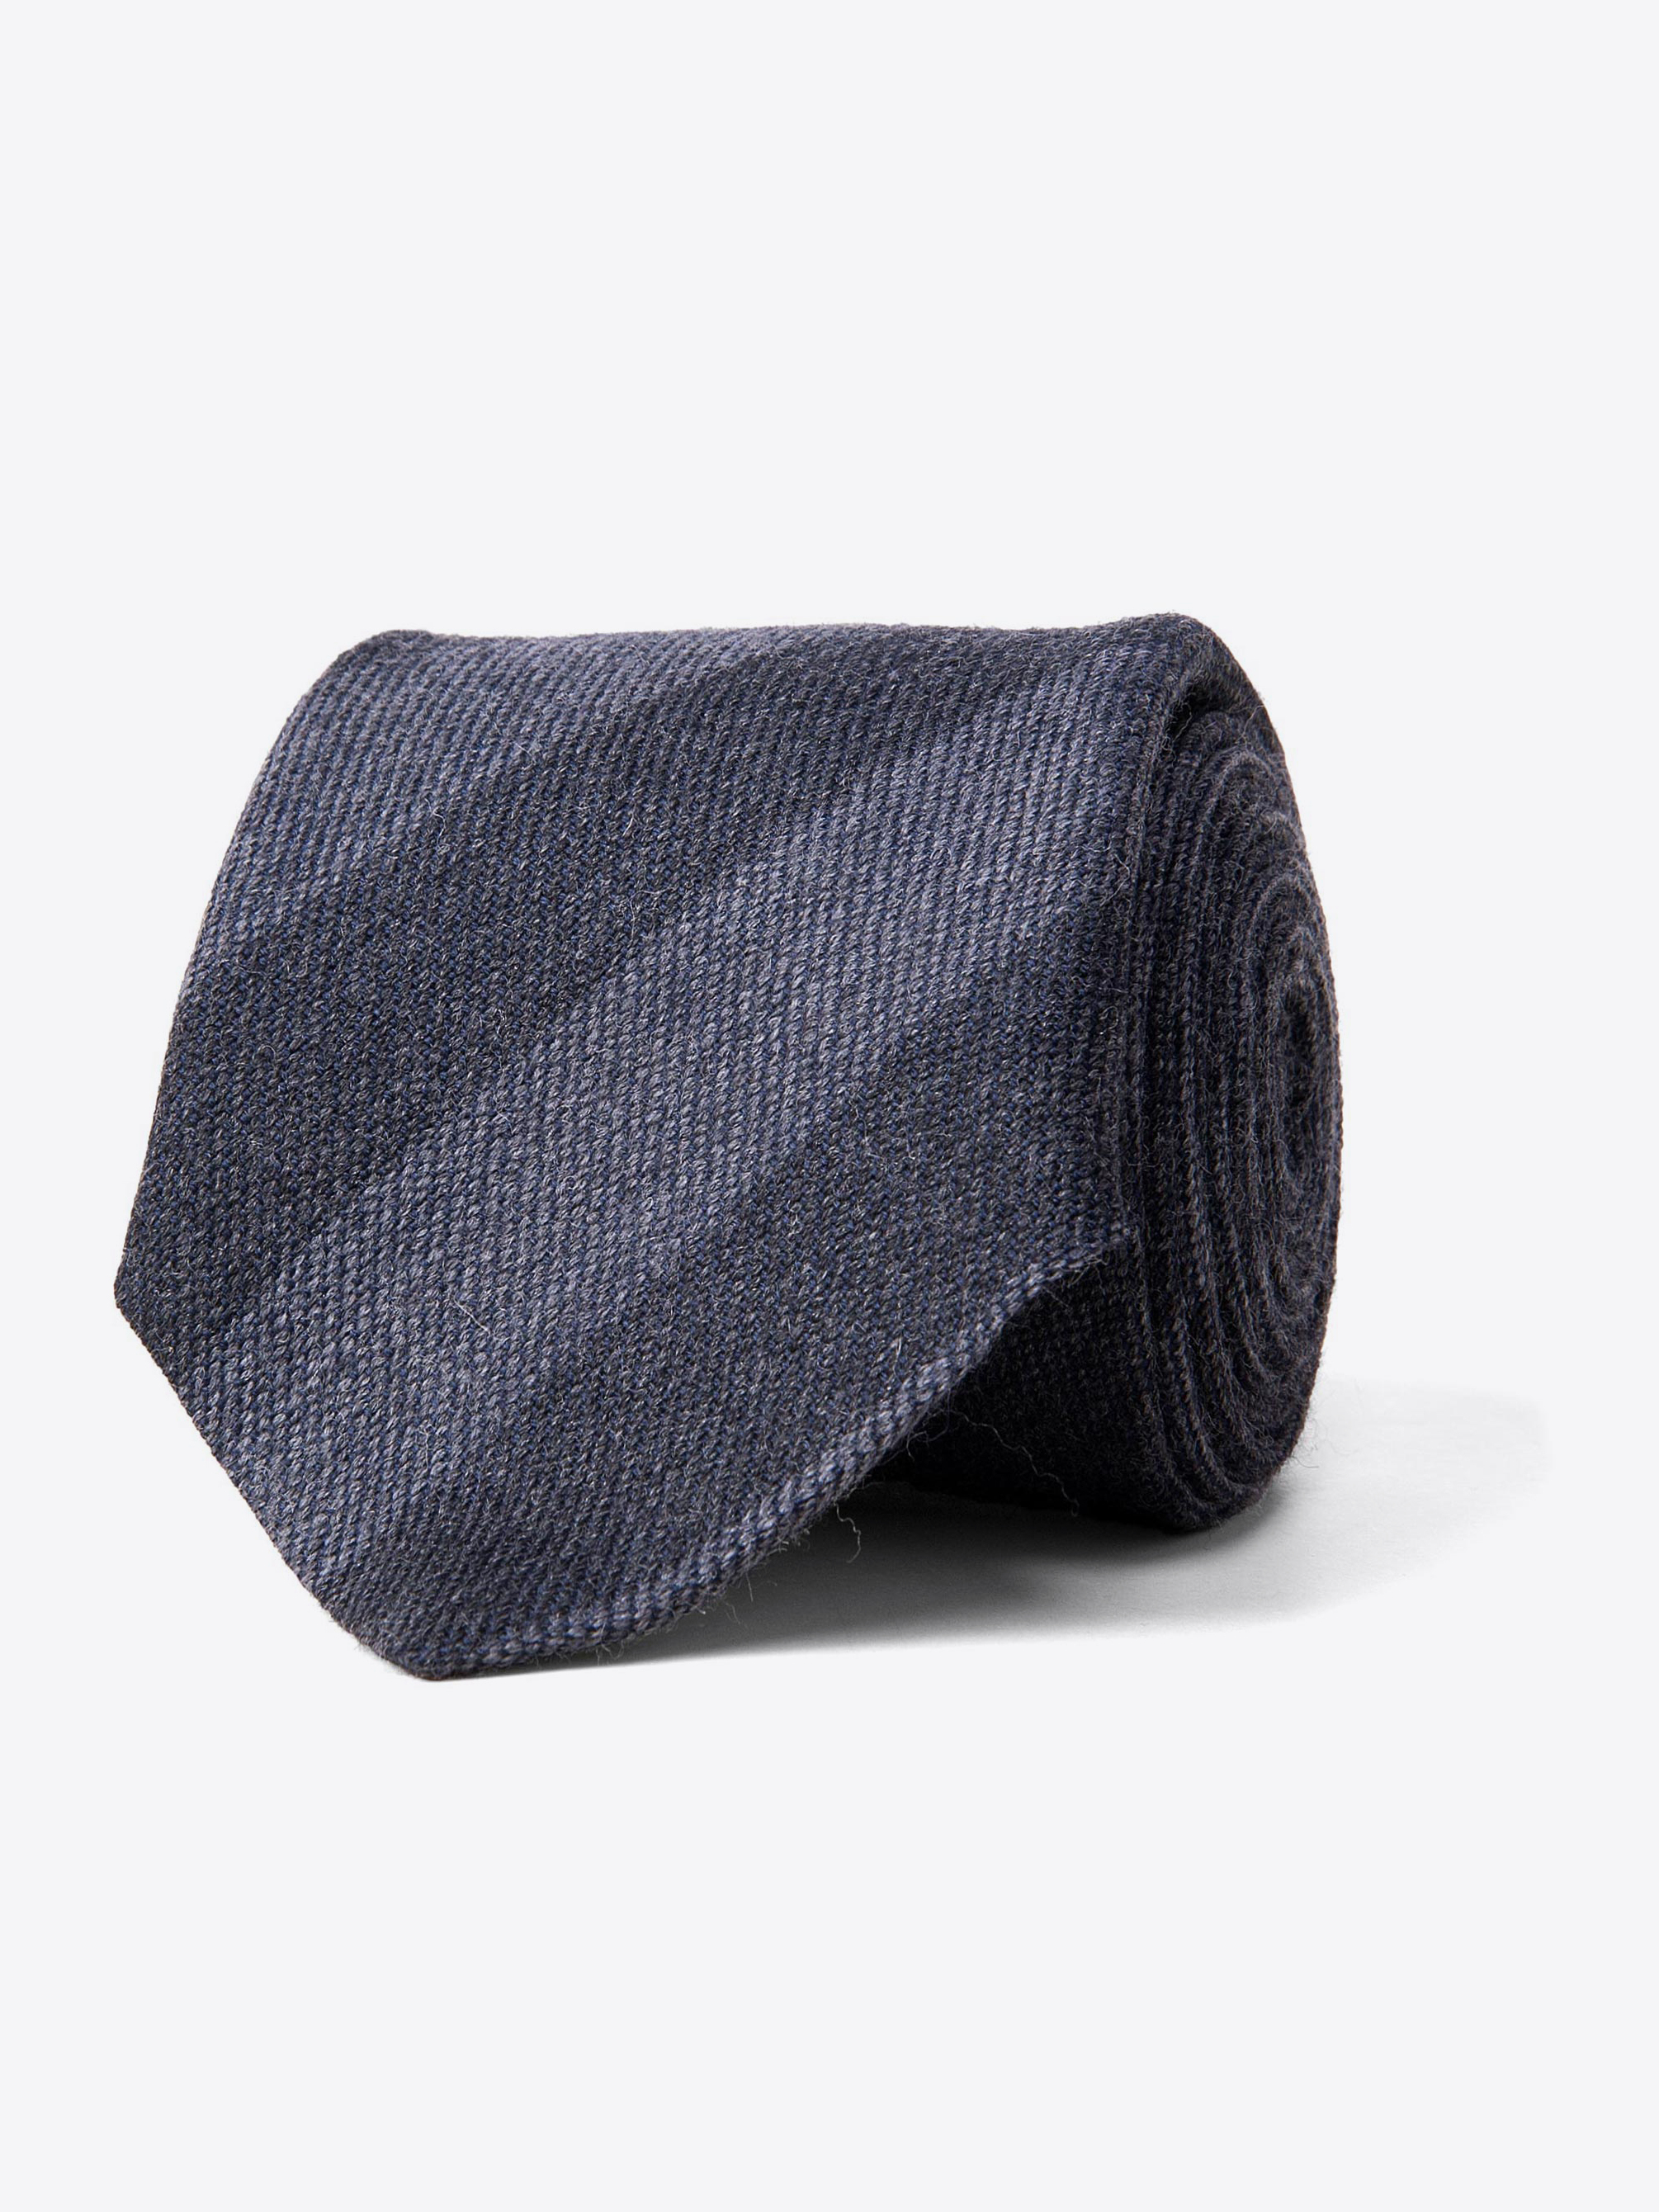 Zoom Image of Charcoal and Grey Wool Striped Tie